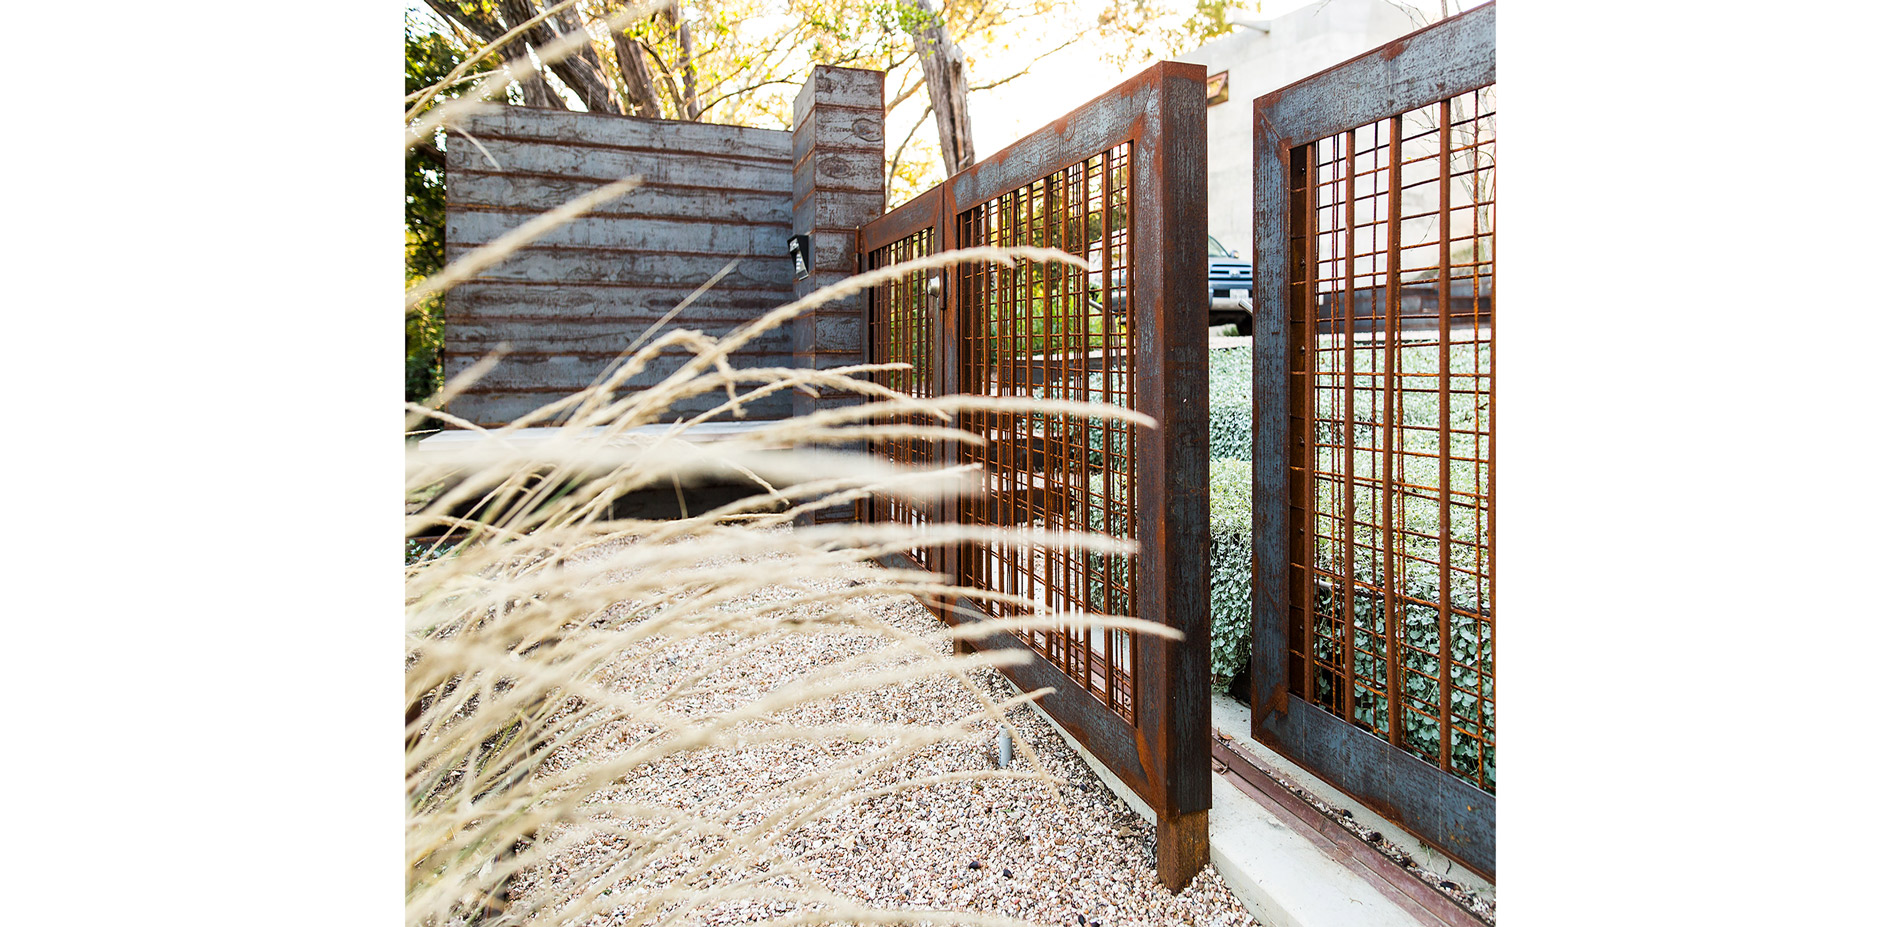 Layers of mesh panels create a pattern of raw steel mesh, providing a warm, transparent entry gate and pool barrier fencing.…